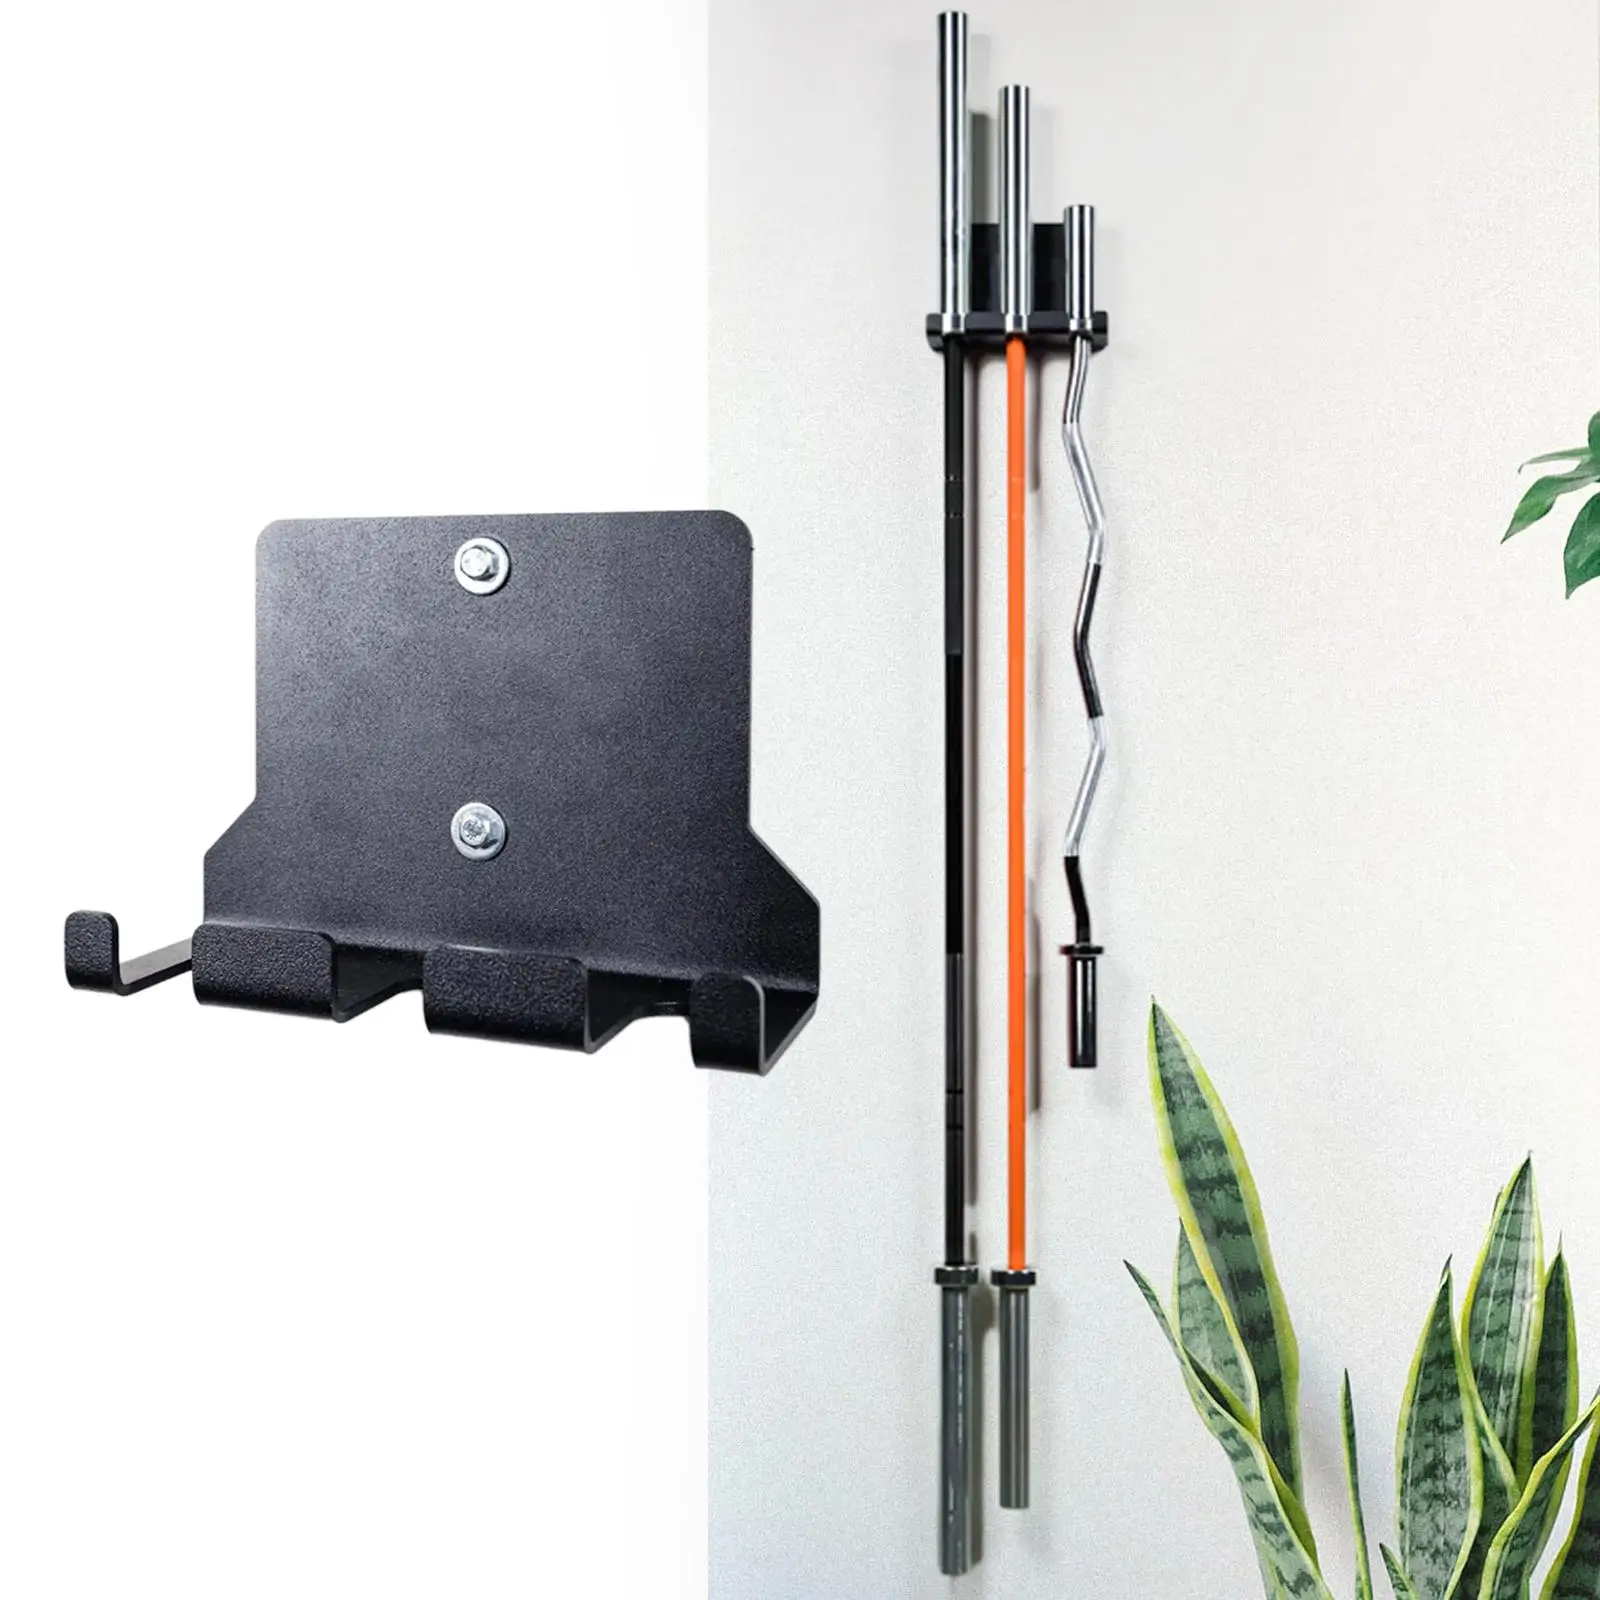 Barbell Storage Holder Rack Display Wall Mount Hanging Space Saving Bar Holder Storage Wall Hanger for Commercial Accessories